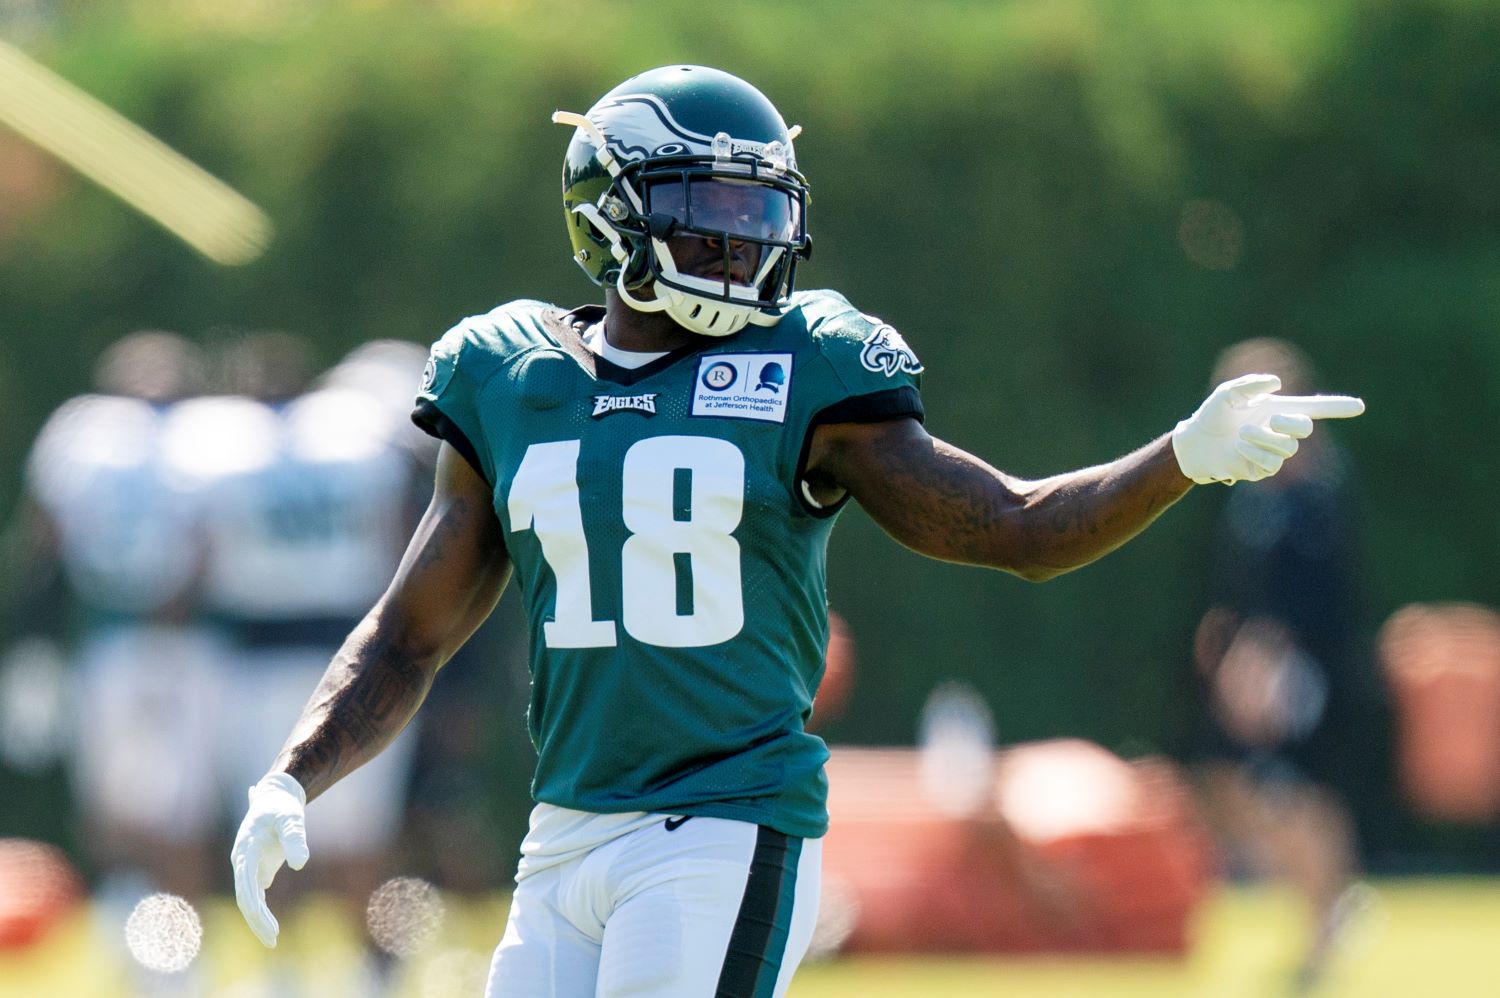 With talented rookie WR Jalen Reagor cleared to return, the Philadelphia Eagles just received a $13 million boost to their offense.